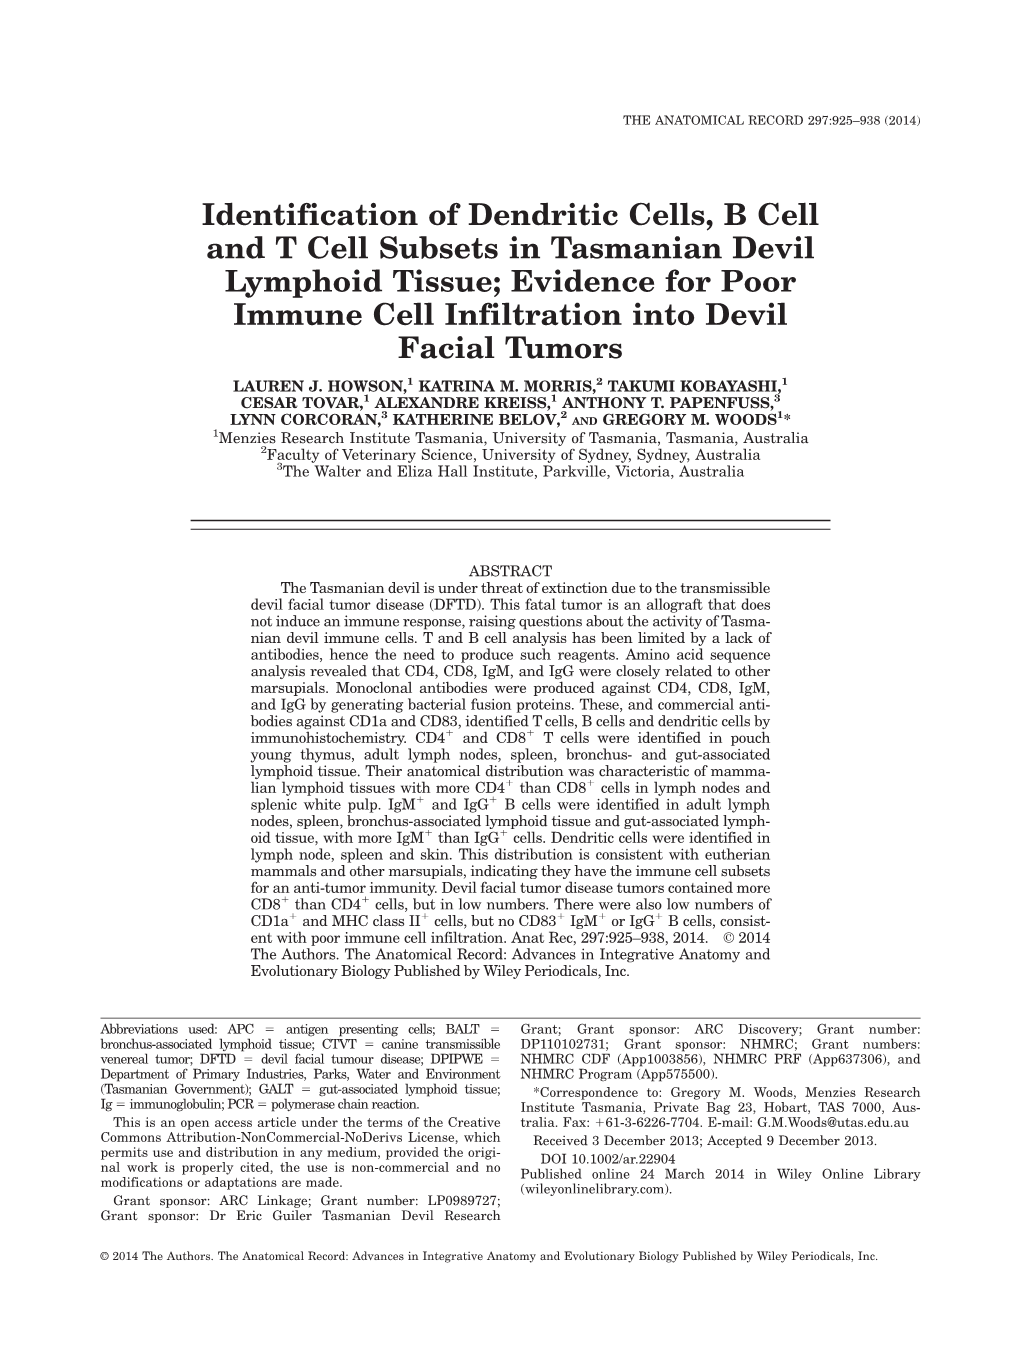 Identification of Dendritic Cells, B Cell and T Cell Subsets in Tasmanian Devil Lymphoid Tissue; Evidence for Poor Immune Cell Infiltration Into Devil Facial Tumors